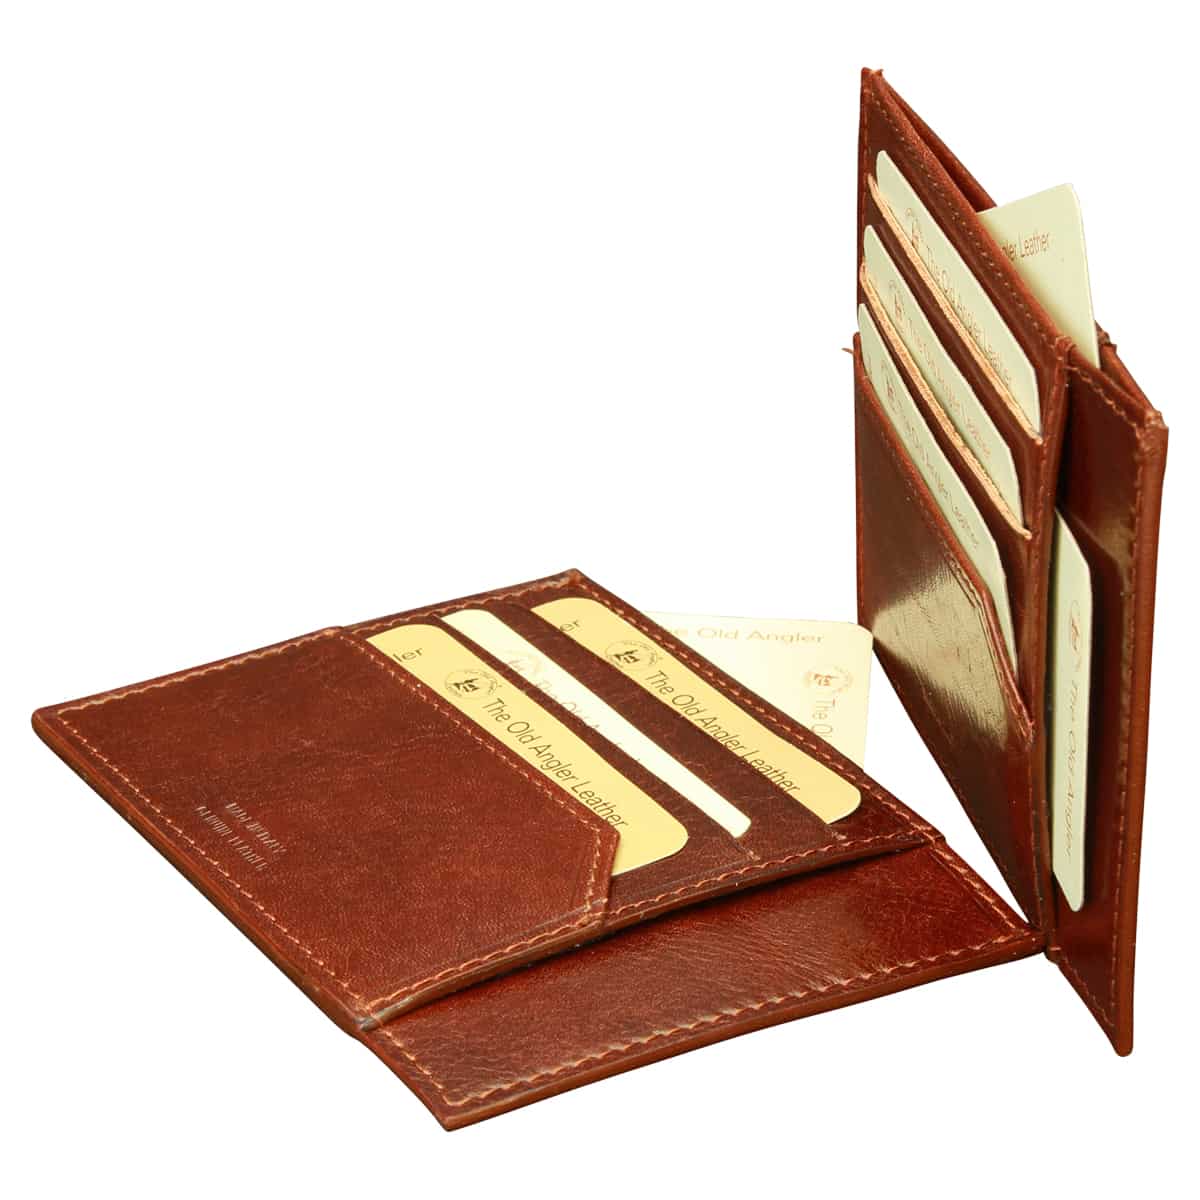 Italian leather credit card holder - Brown | 804005MA US | Old Angler Firenze